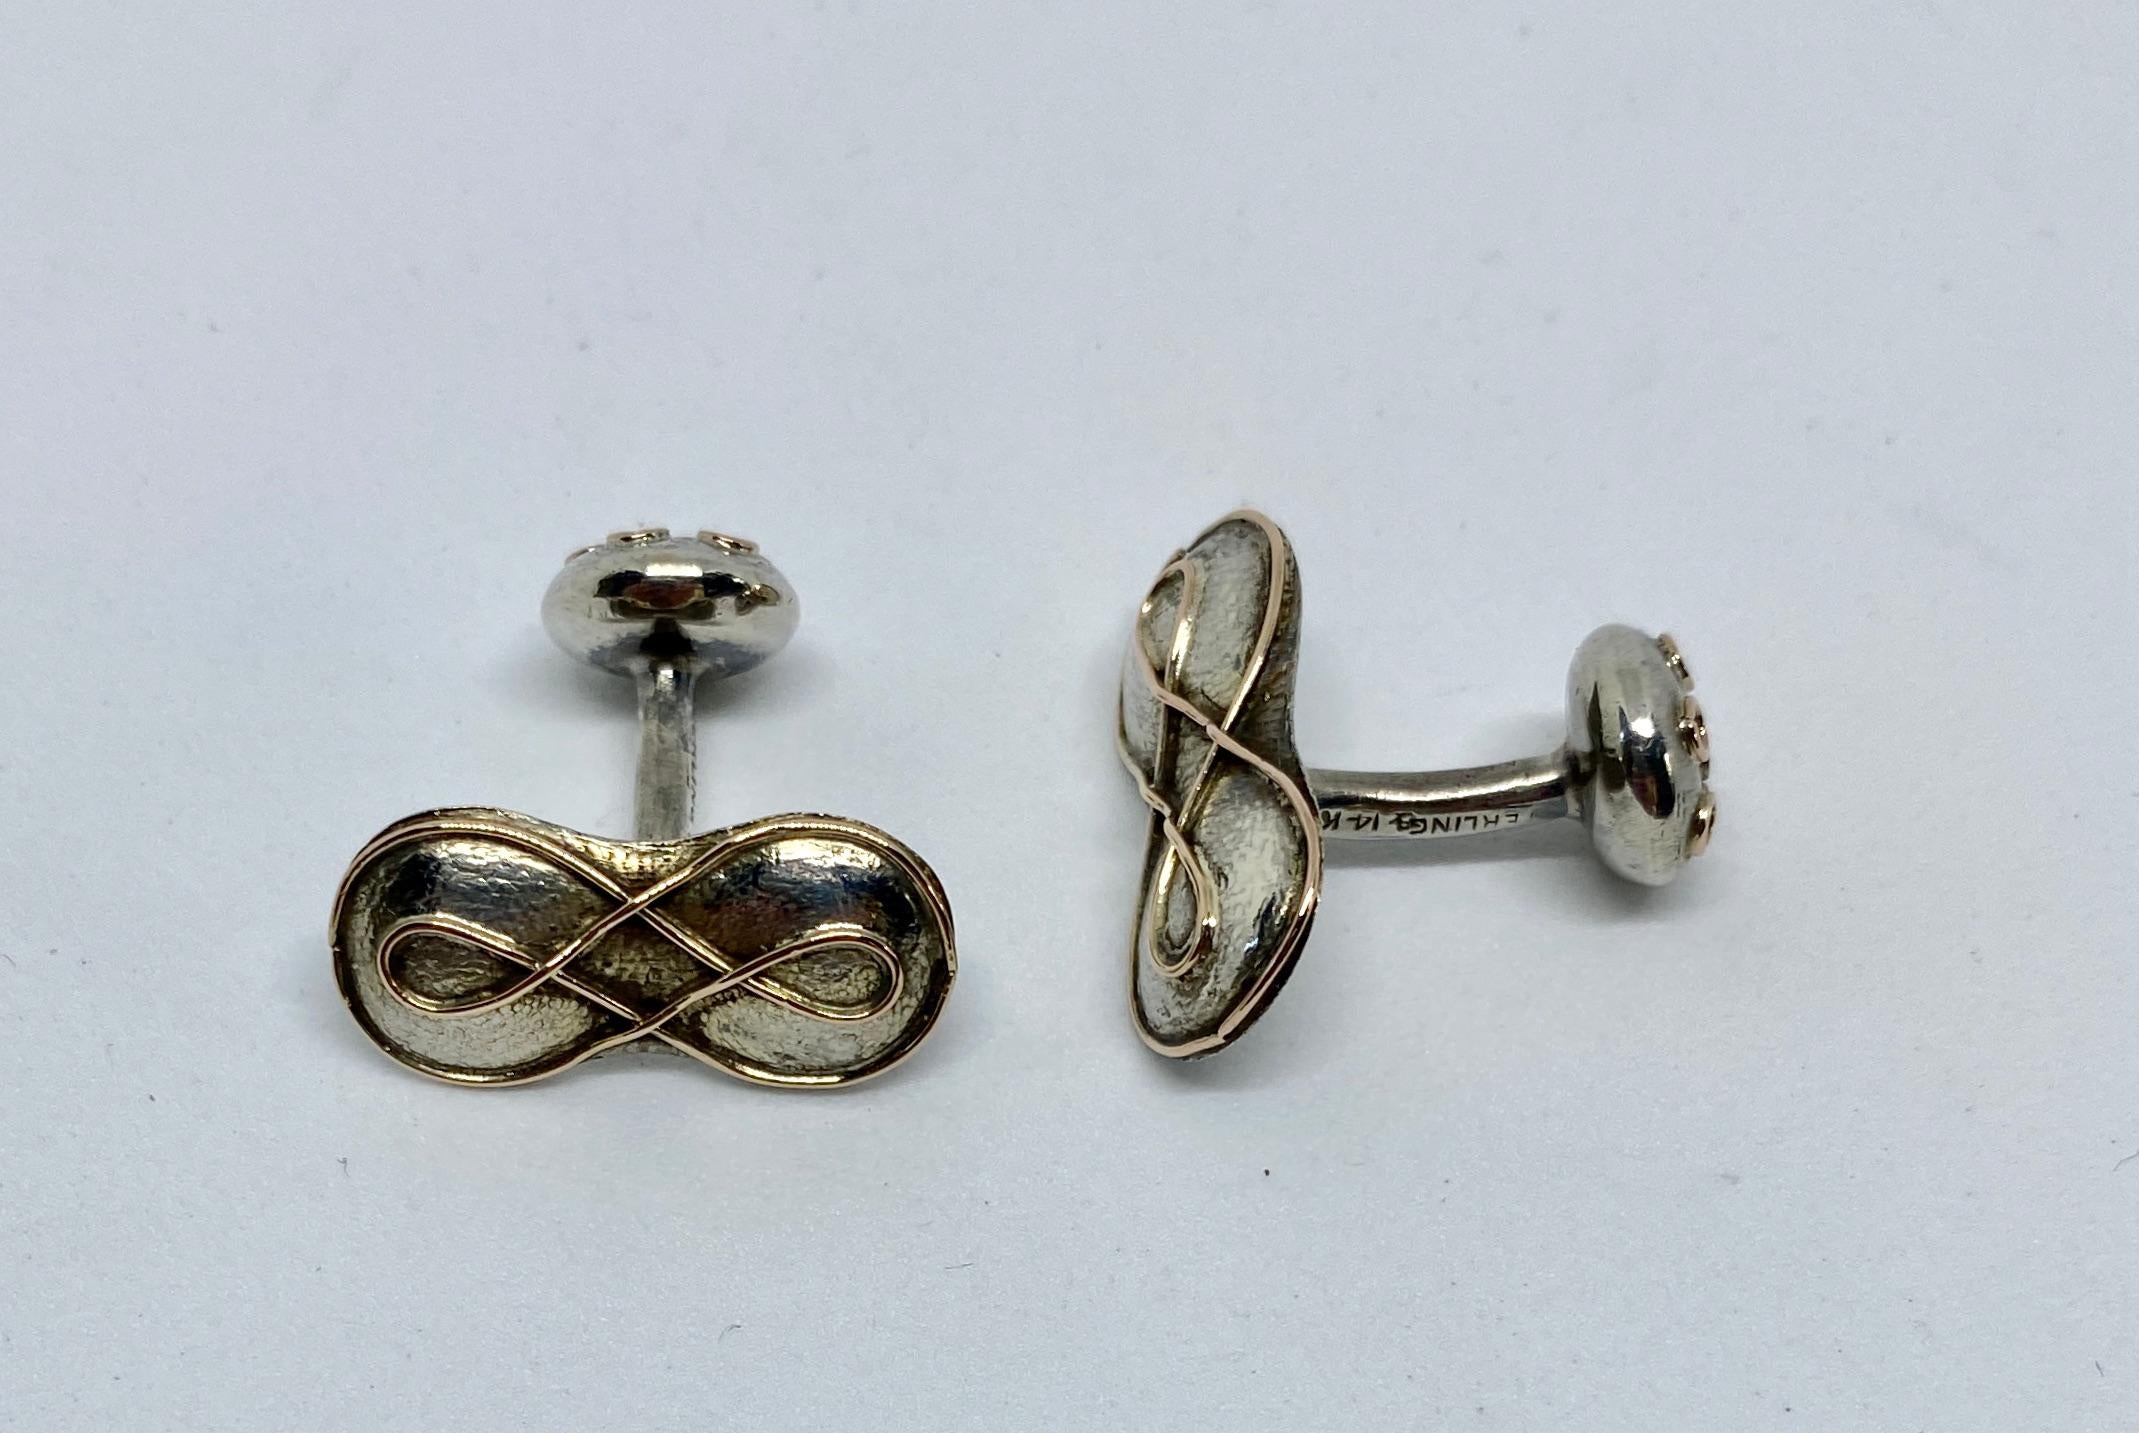 An extraordinary pair of handmade cufflinks in hammered sterling silver with 14K yellow gold from the Arts & Crafts era.

Made by George W. Shiebler of New York (active from 1876 to 1910), these cufflinks feature figure-8 fronts measuring 22.6 by